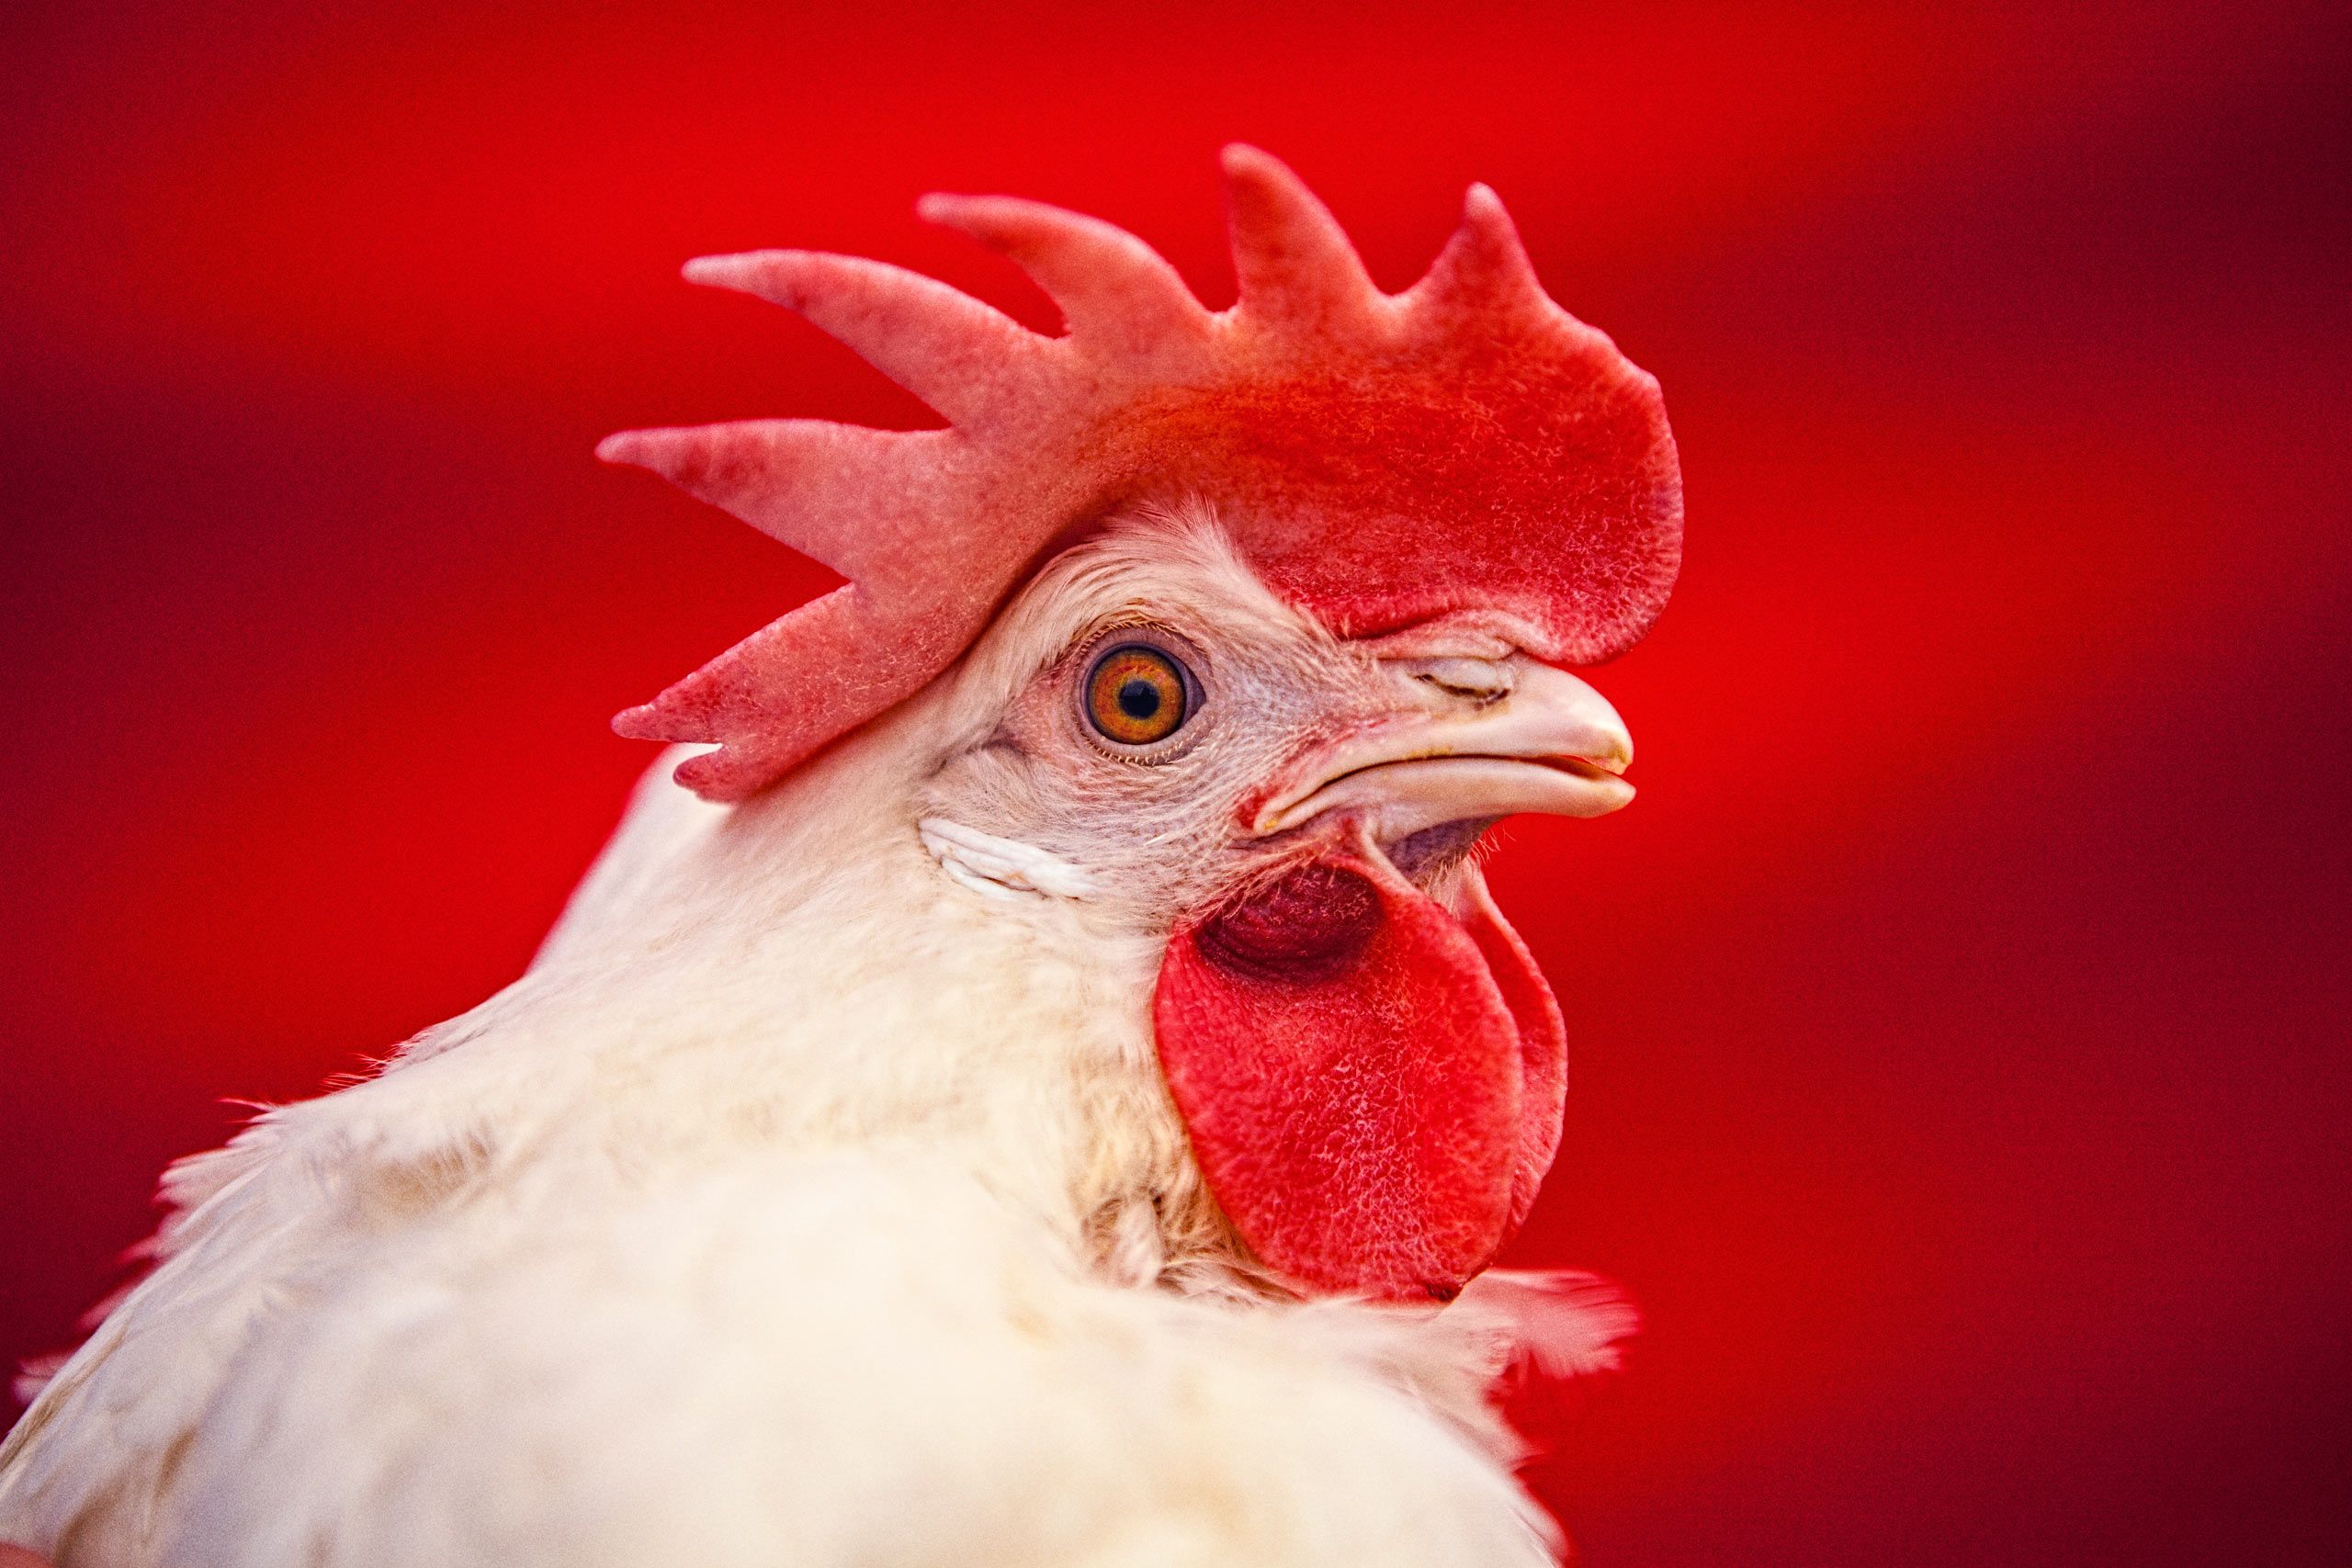 Portrait of an Egg Laying Chicken on Against Red Backdrop